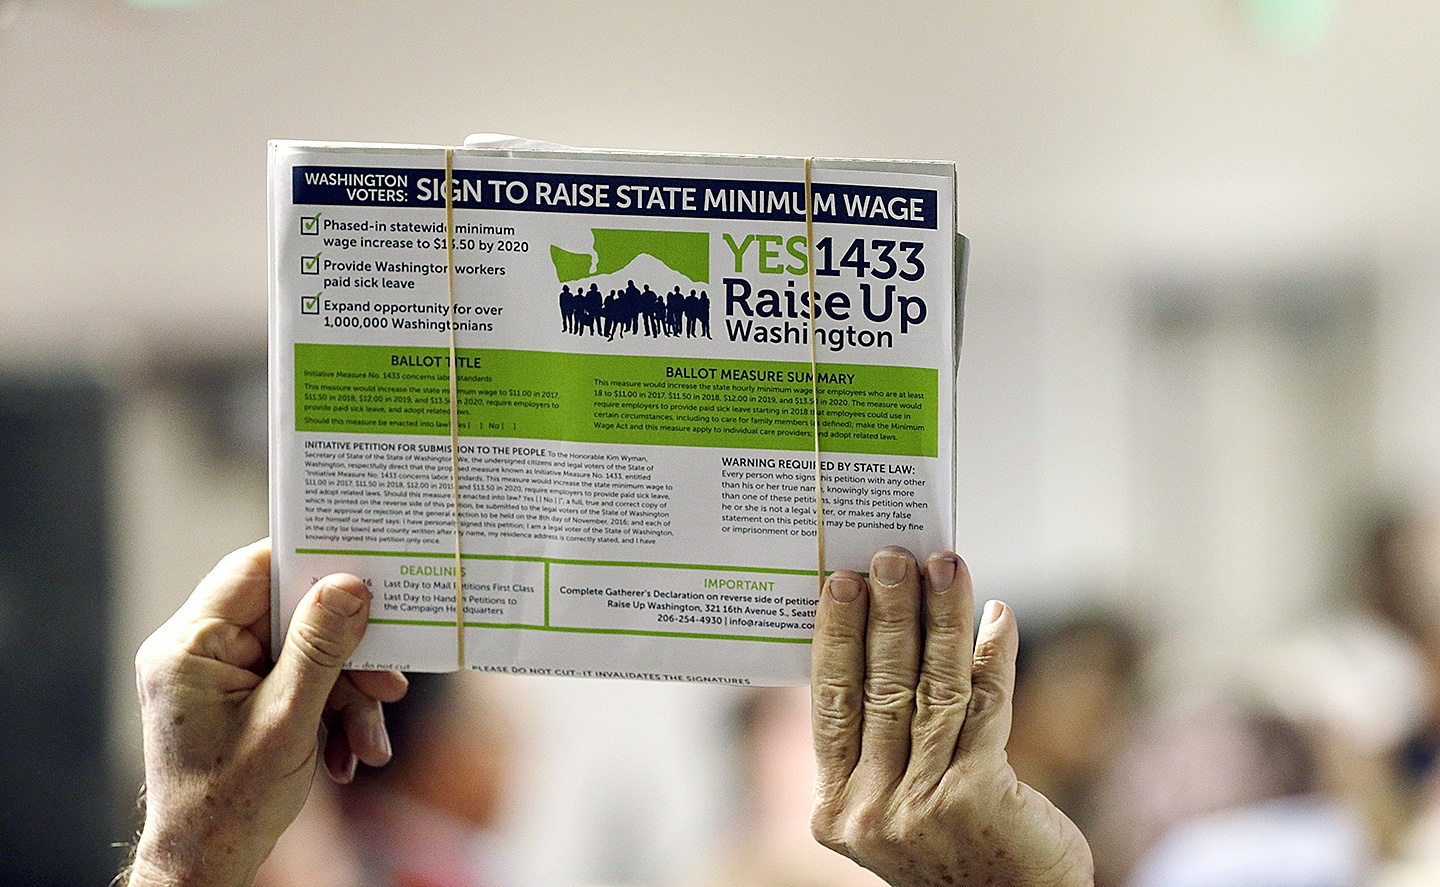 In this March 22, 2016, photo, a supporter holds up a petition for Initiative 1433, a ballot measure to raise Washington state’s minimum wage and allow all workers in the state to earn paid sick leave, in Everett, Washington. The passage of the minimum wage hike was among the top news stories in Washington in 2016. (AP Photo/Elaine Thompson, File)